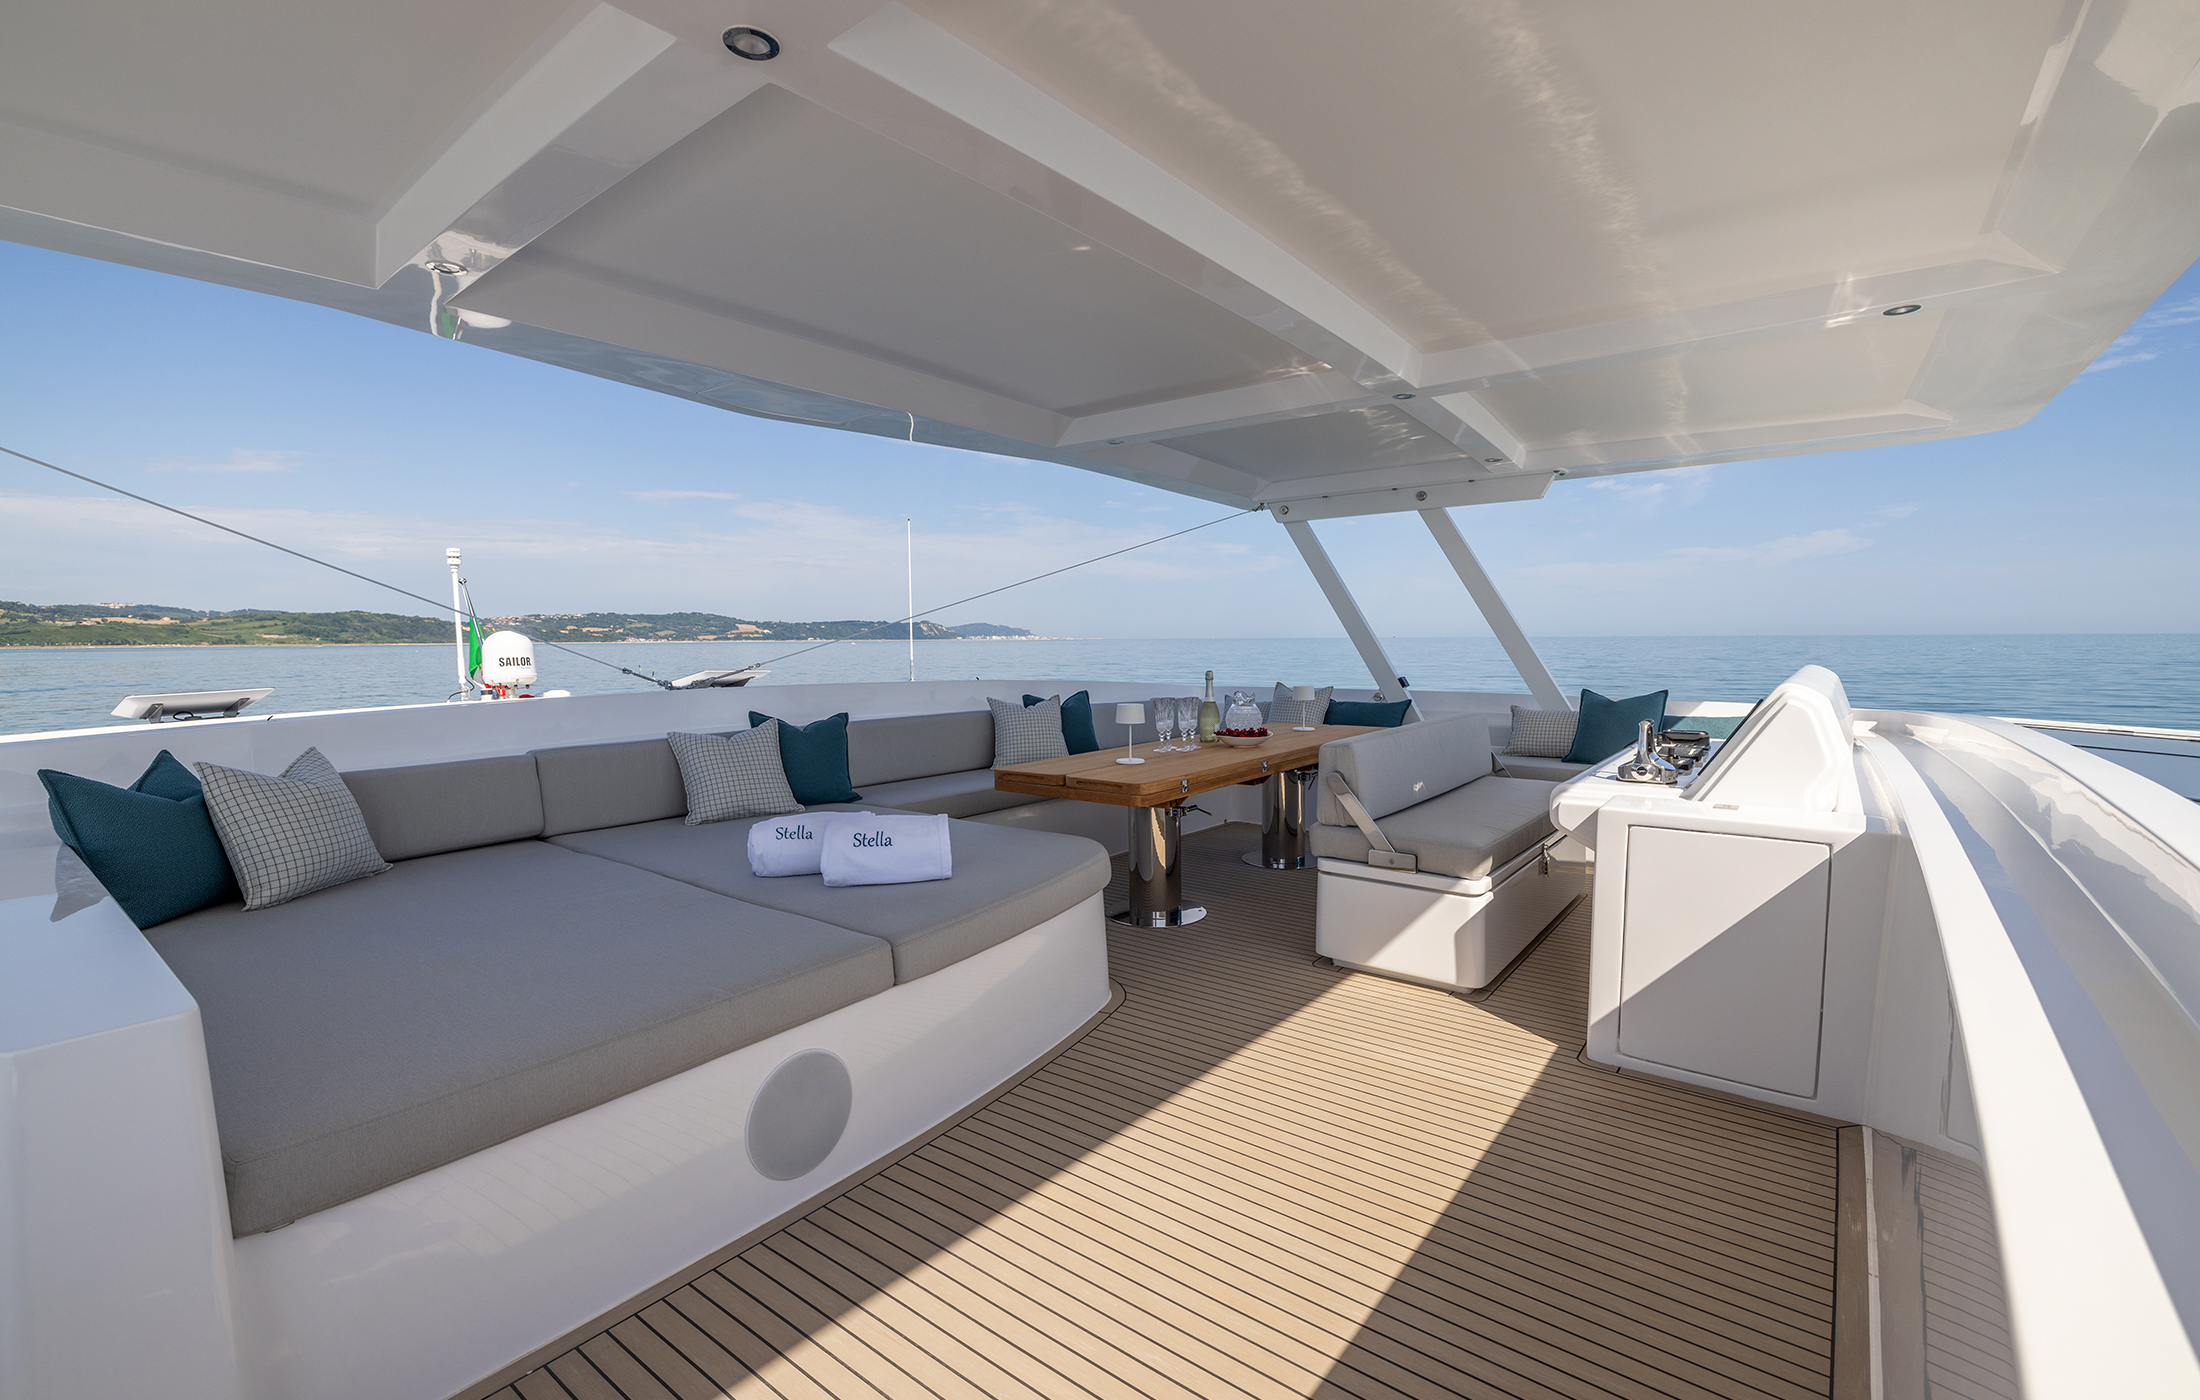 Interior of the flybridge of a yacht